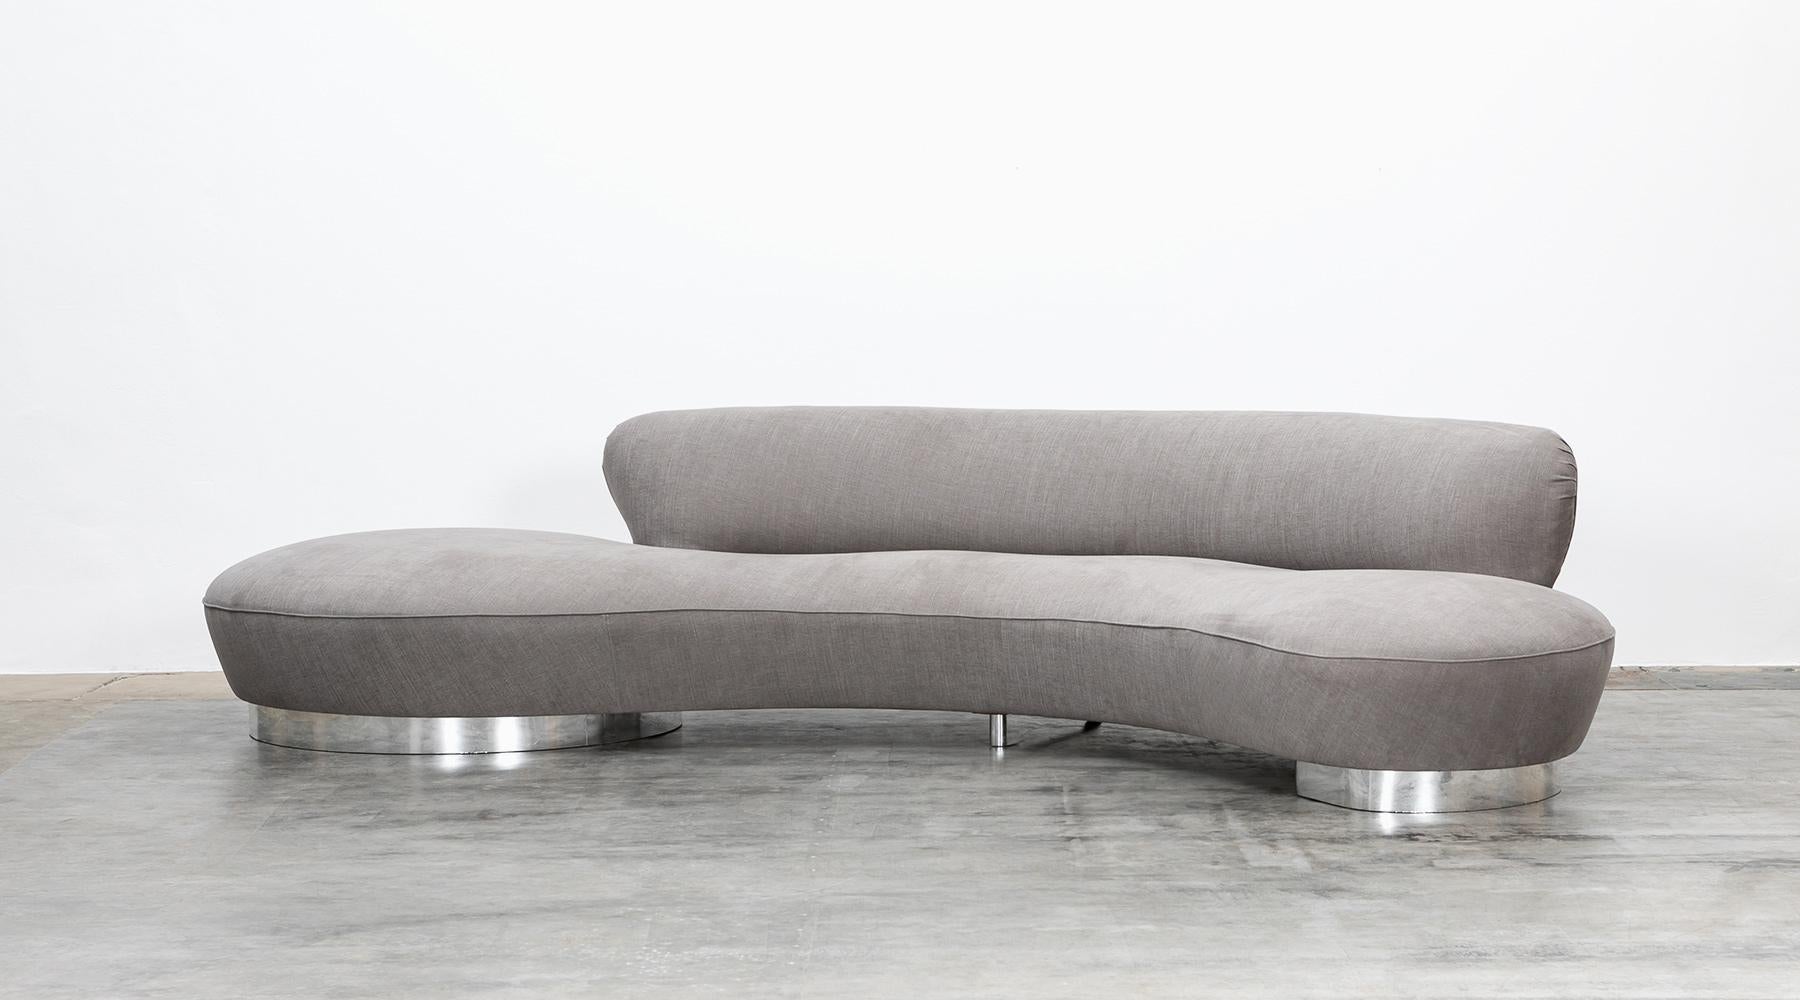 Sofa, new upholstery in high-quality fabric, warm grey, USA, 1980s.

Serpentine sofa by German-born American Vladimir Kagan. Manufactured for Club House Italia as part of their New York collection. Kagan has made himself a name through his